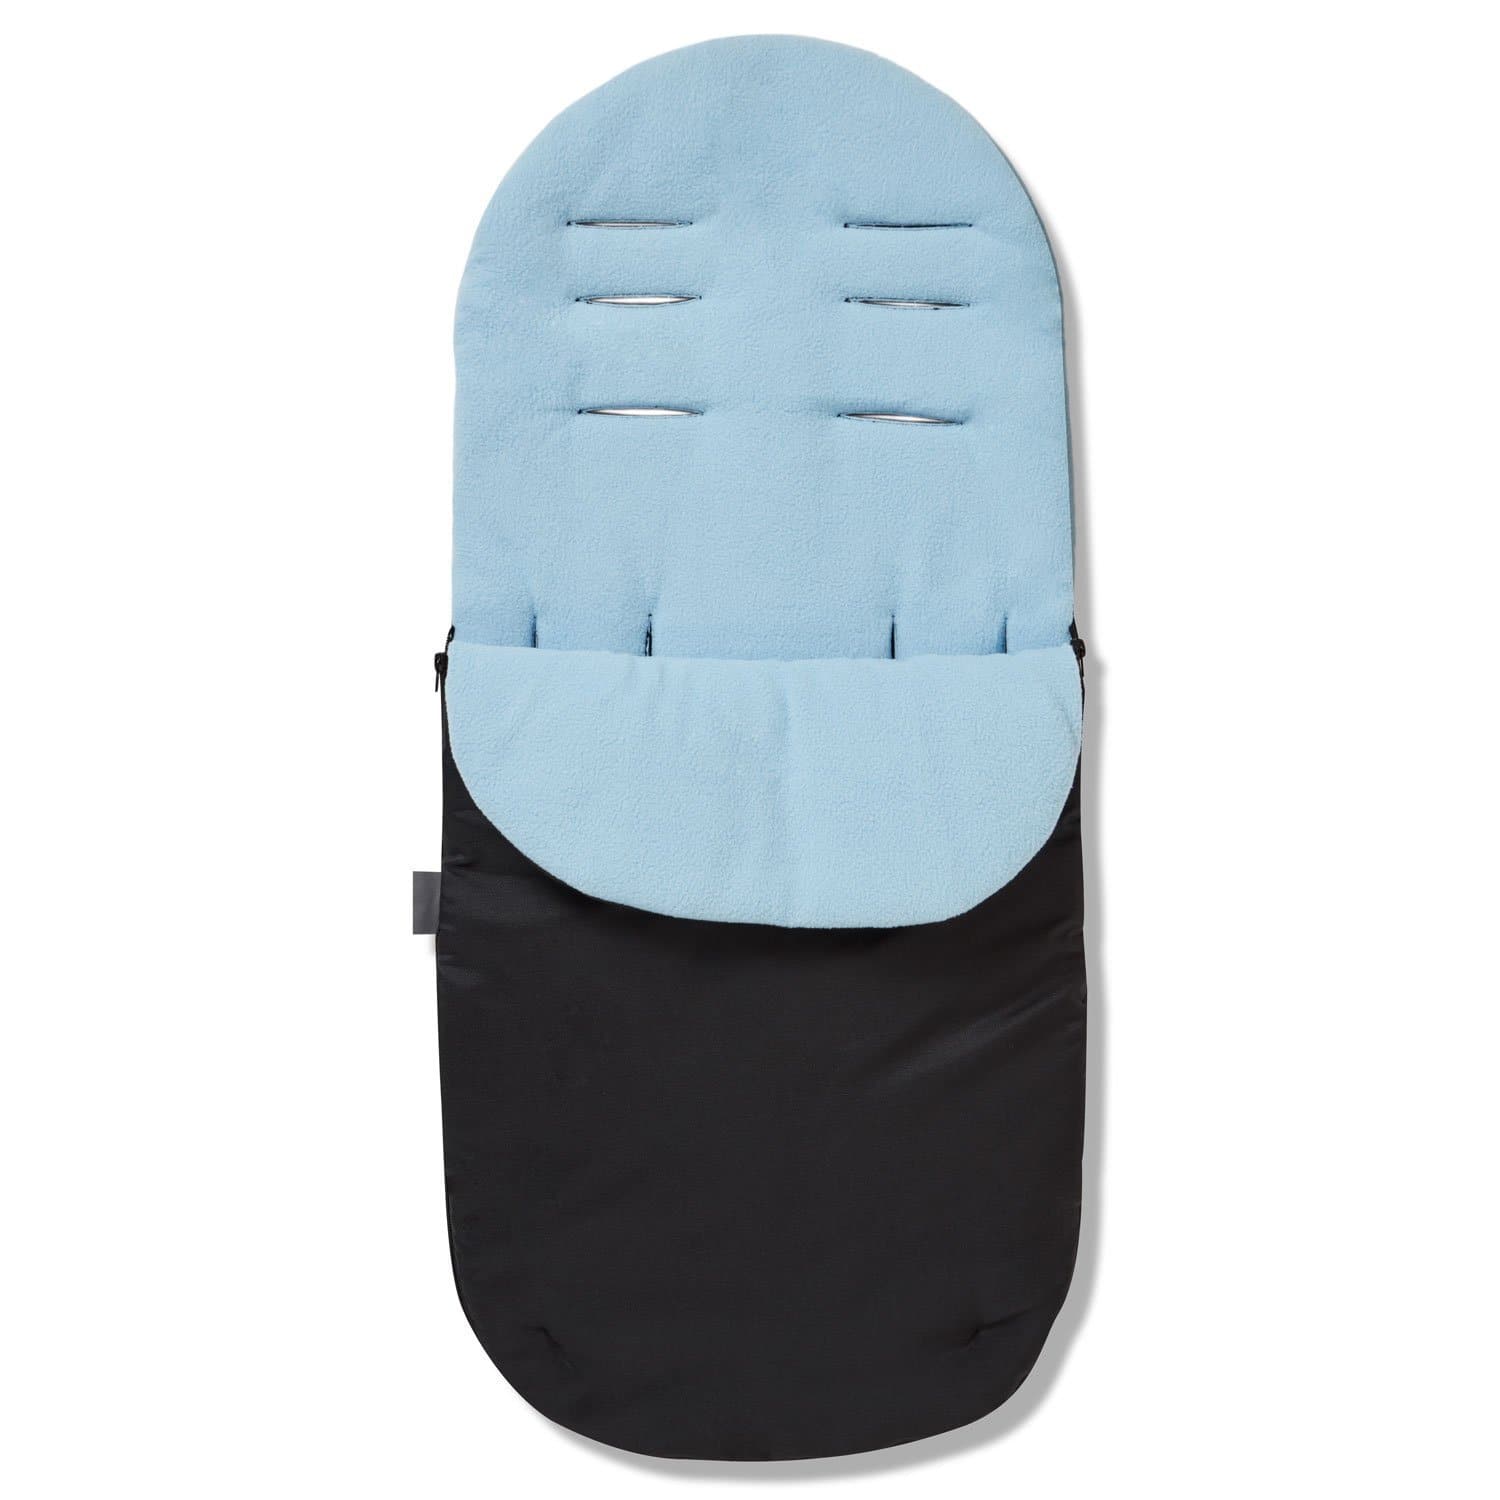 Footmuff / Cosy Toes Compatible with Little Shield - For Your Little One